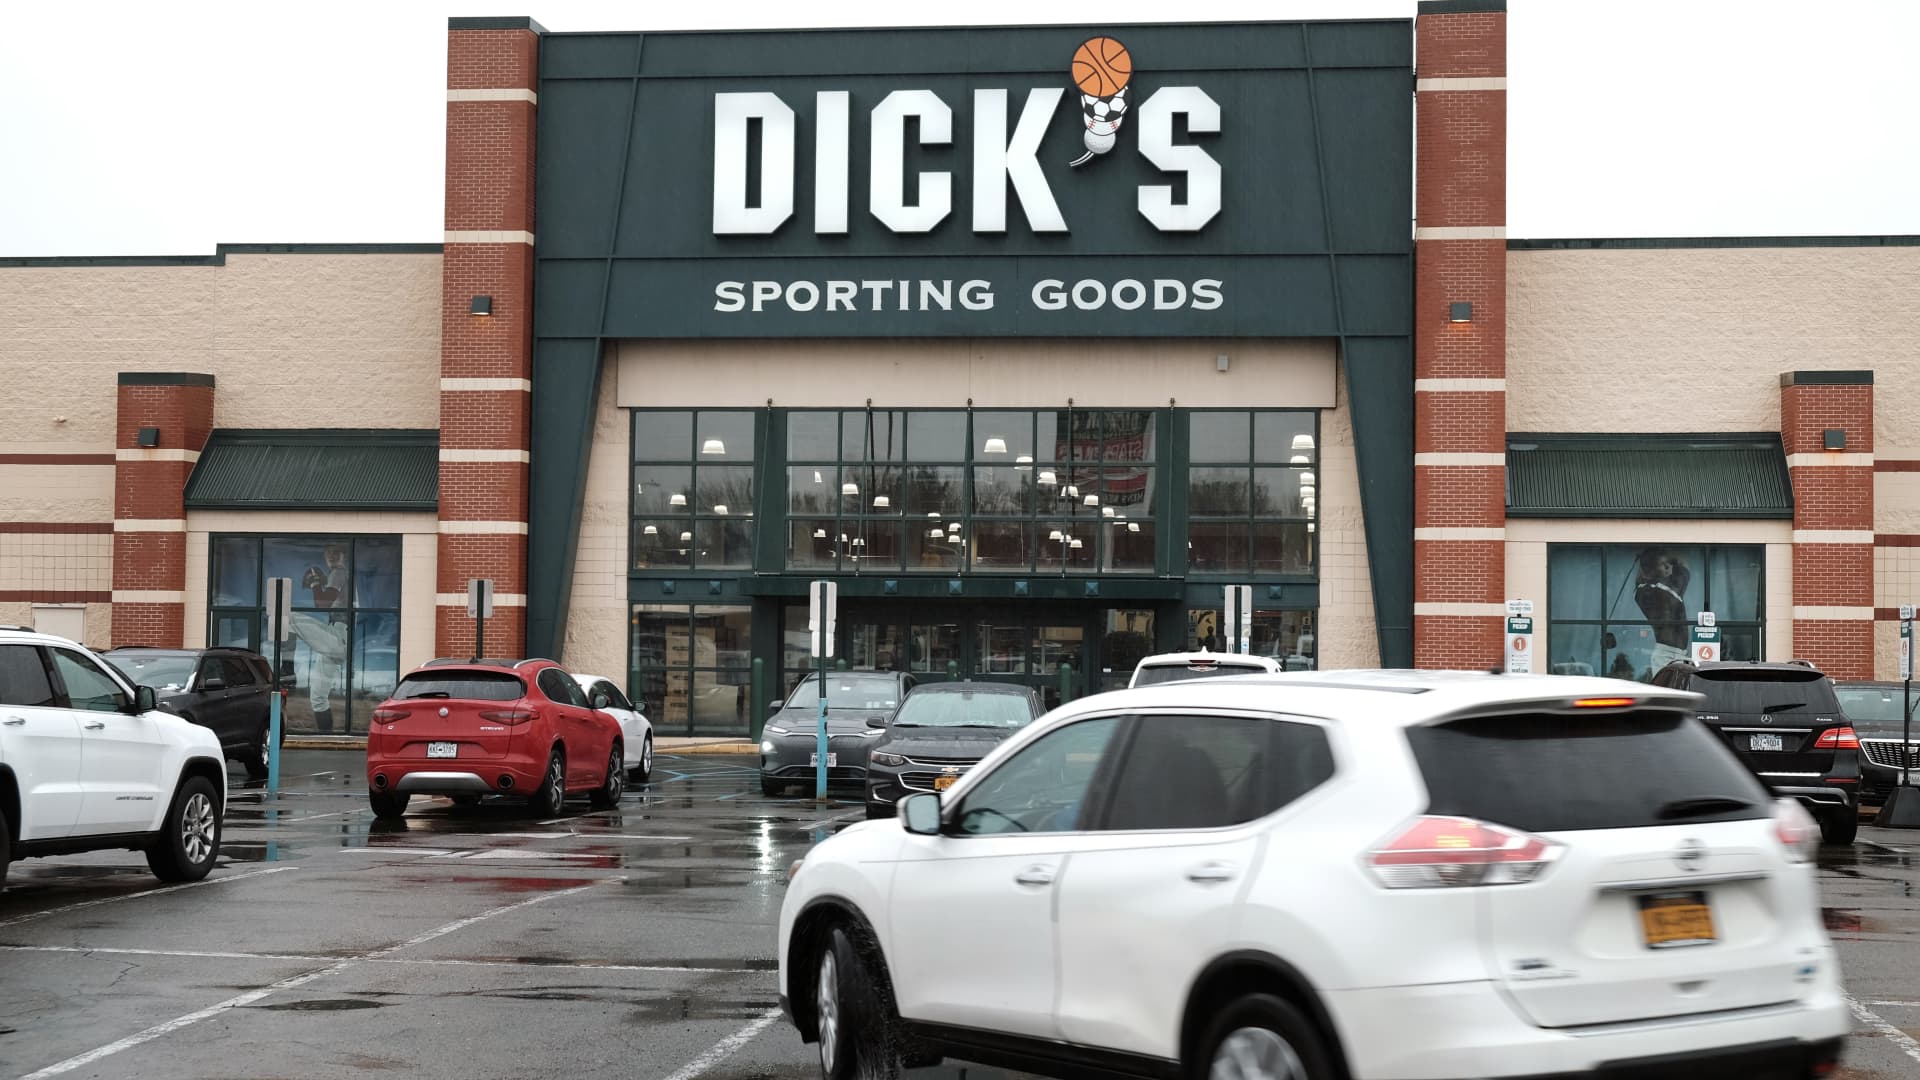 Stocks making the biggest moves premarket: Dick’s Sporting Goods, Fabrinet, Macy’s, AppLovin and more